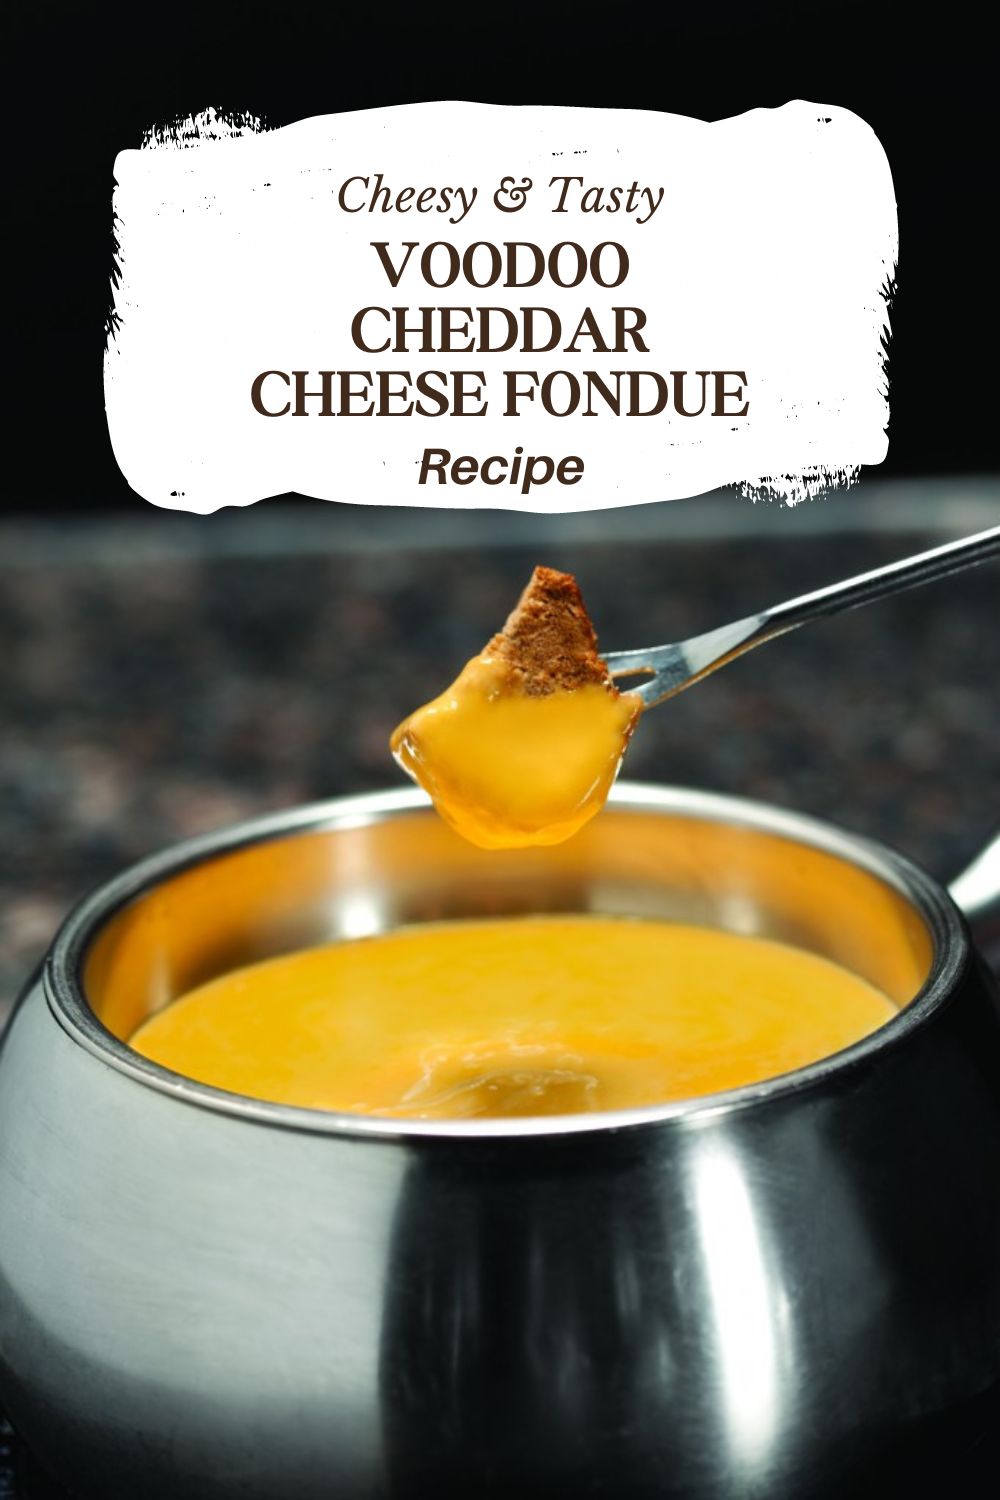 Voodoo Cheddar Cheese Fondue recipe - Just Short of Crazy